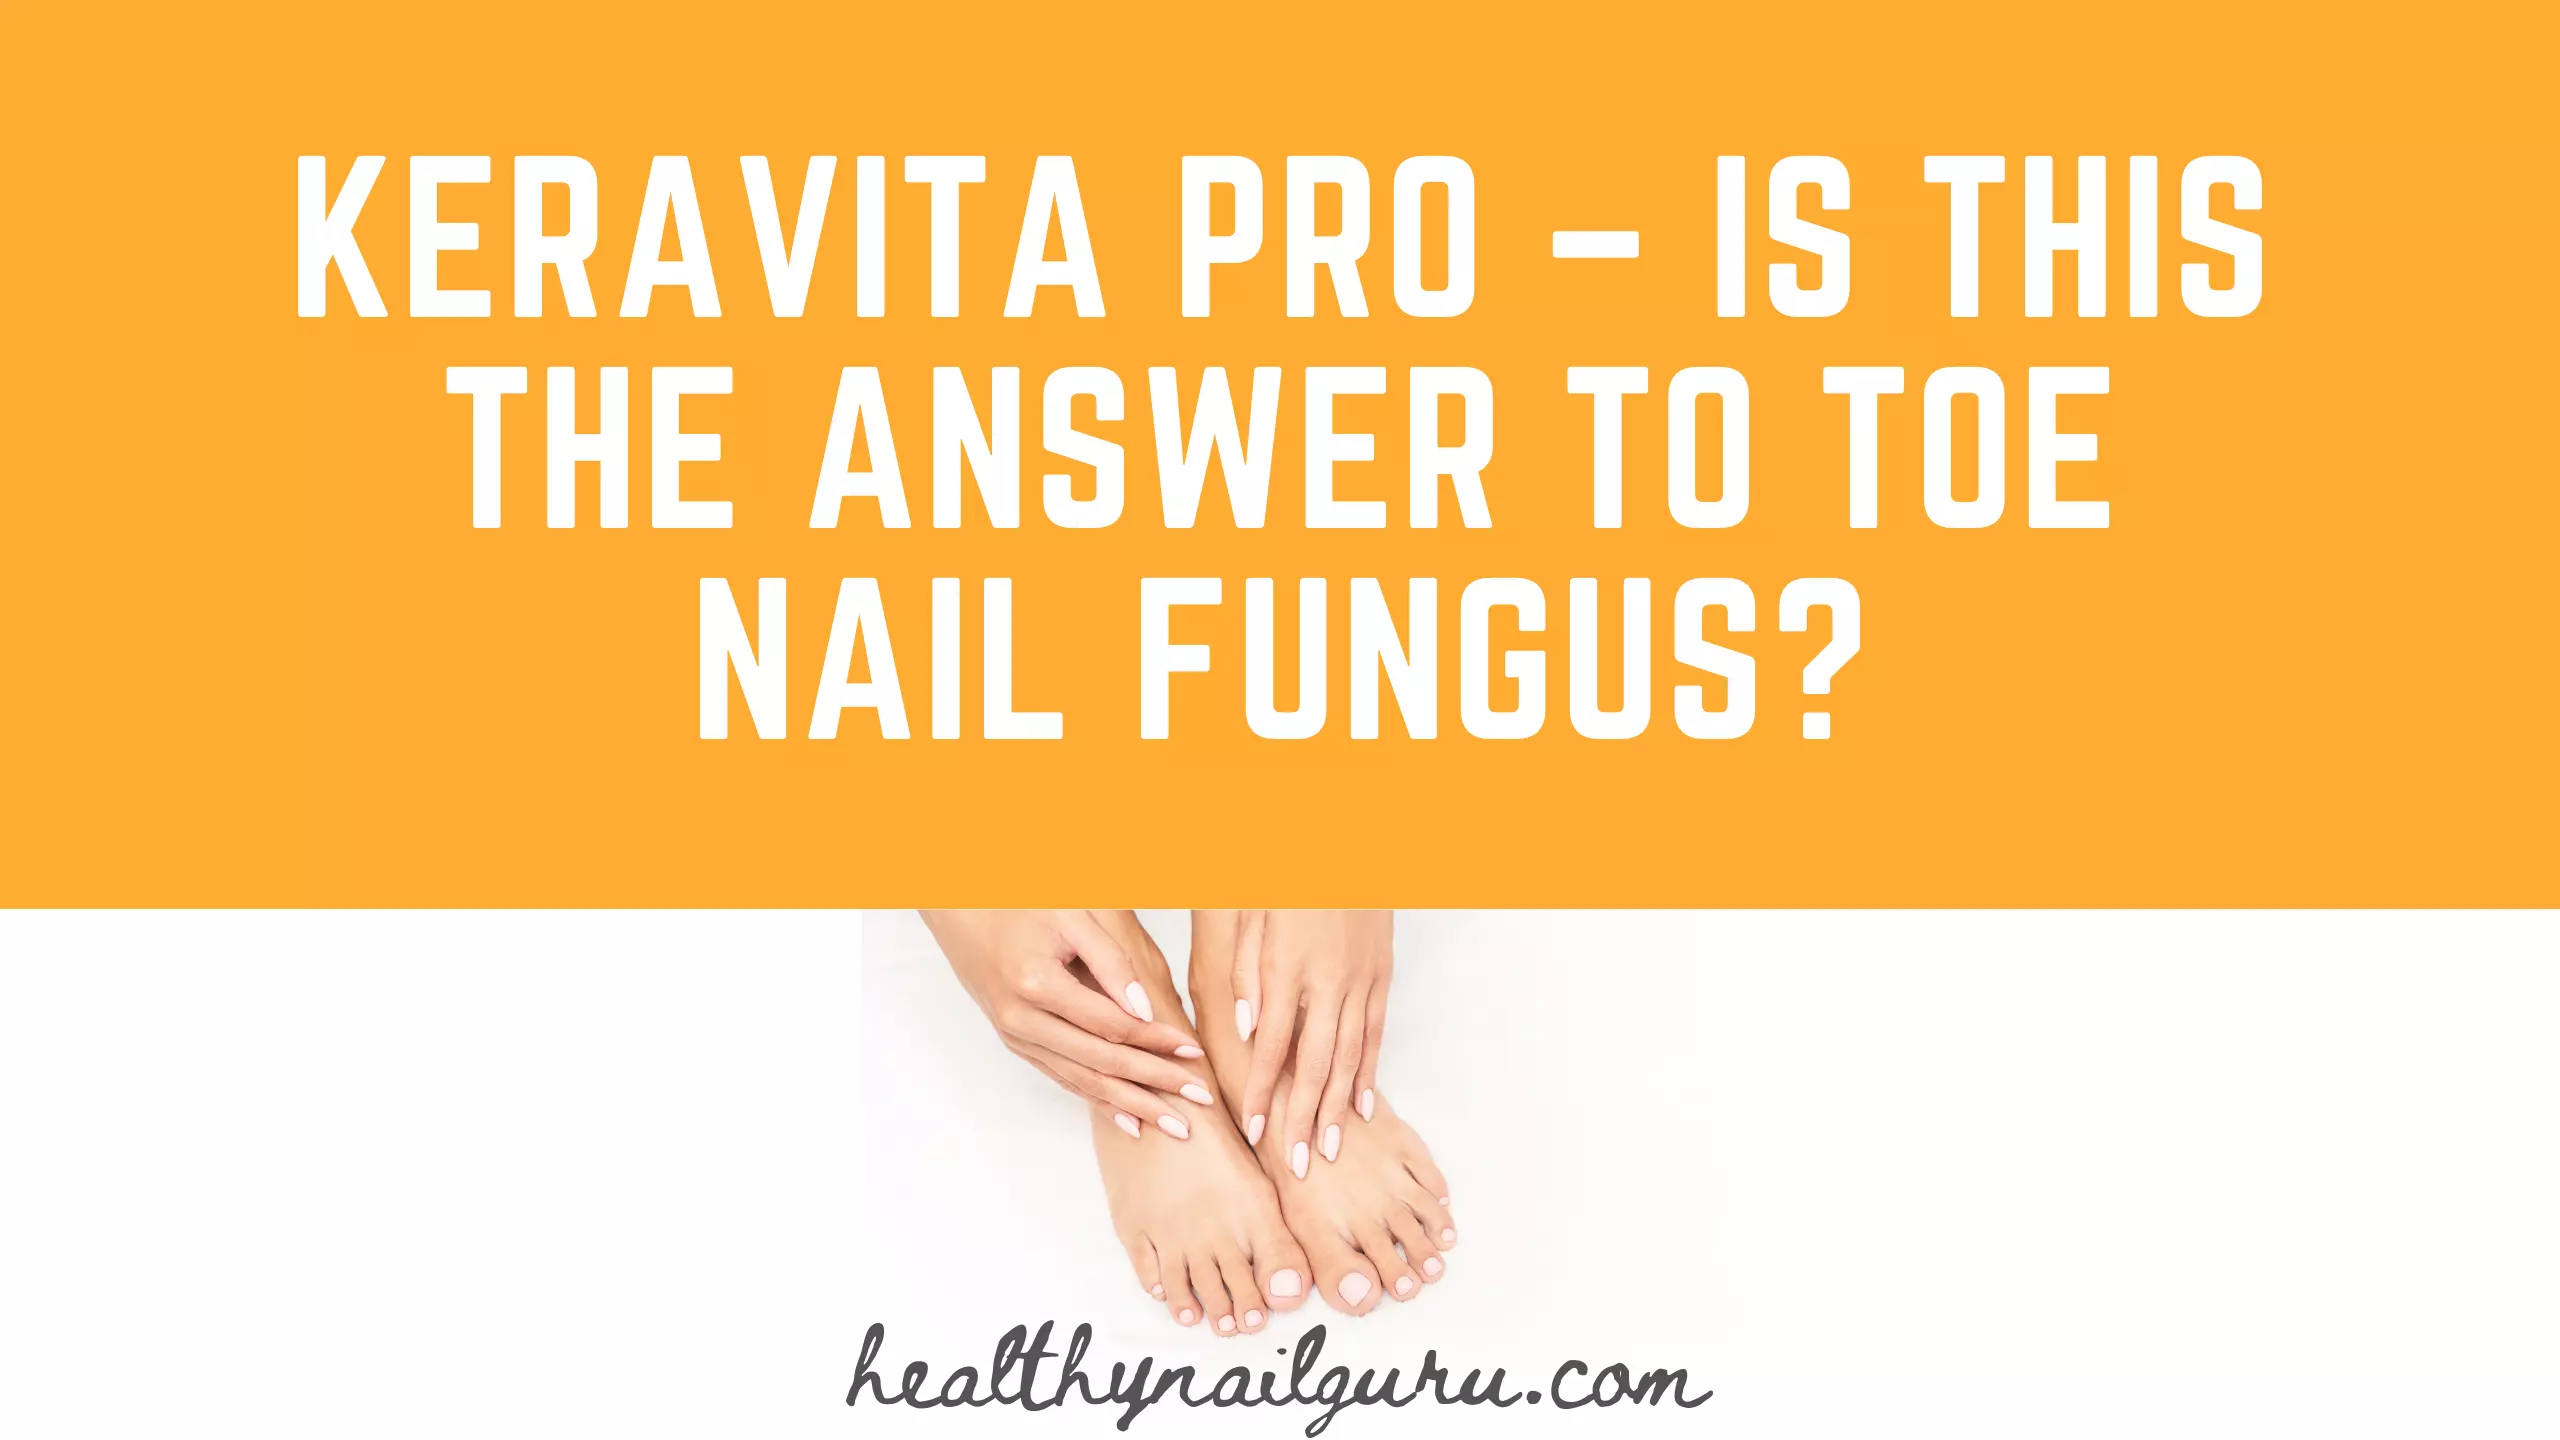 Keravita Pro – Is This The Answer To Toe Nail Fungus